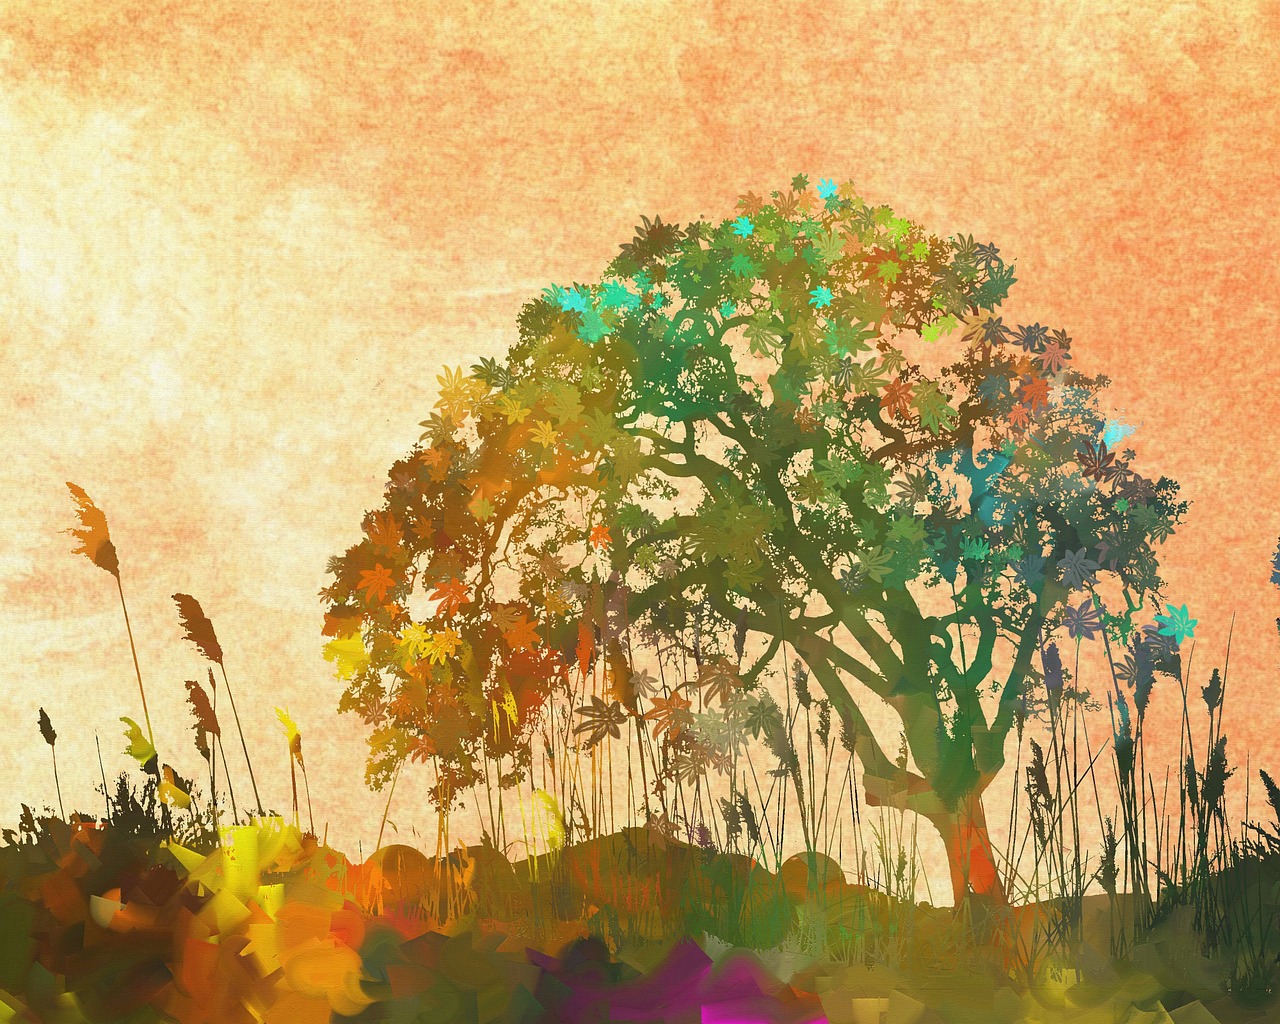 a painting of a tree in the middle of a field, a digital painting, digital art, both bright and earth colors, savana background, ultrawide watercolor, stylized silhouette